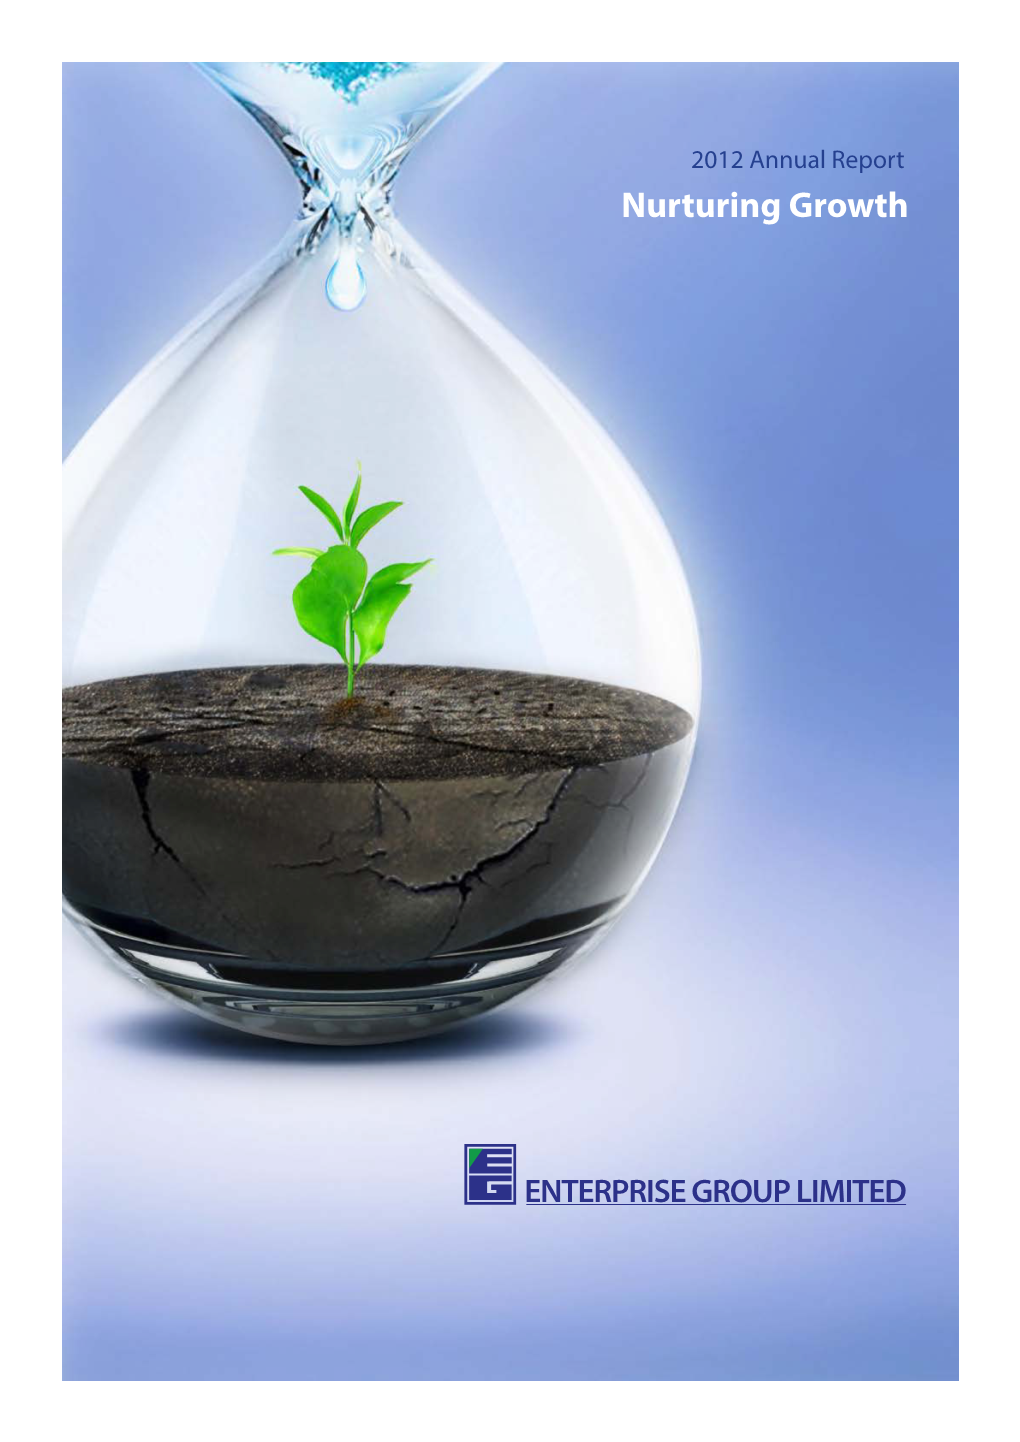 2012 Annual Report Nurturing Growth Enterprise Group Limited Financial Statements for the Year Ended 31 December 2012